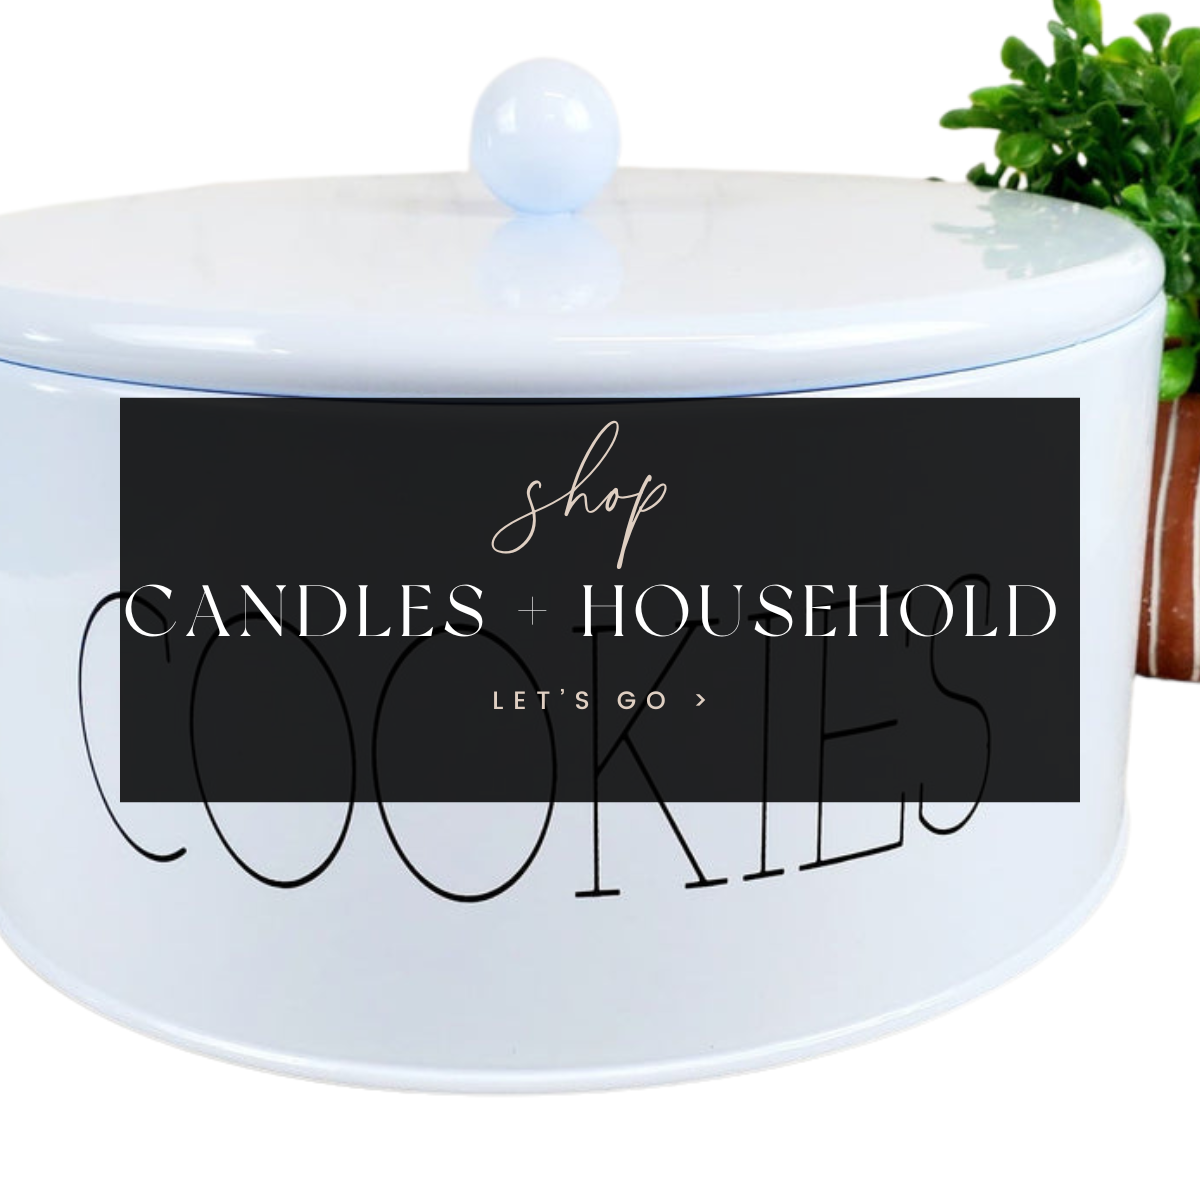 Candles + Household